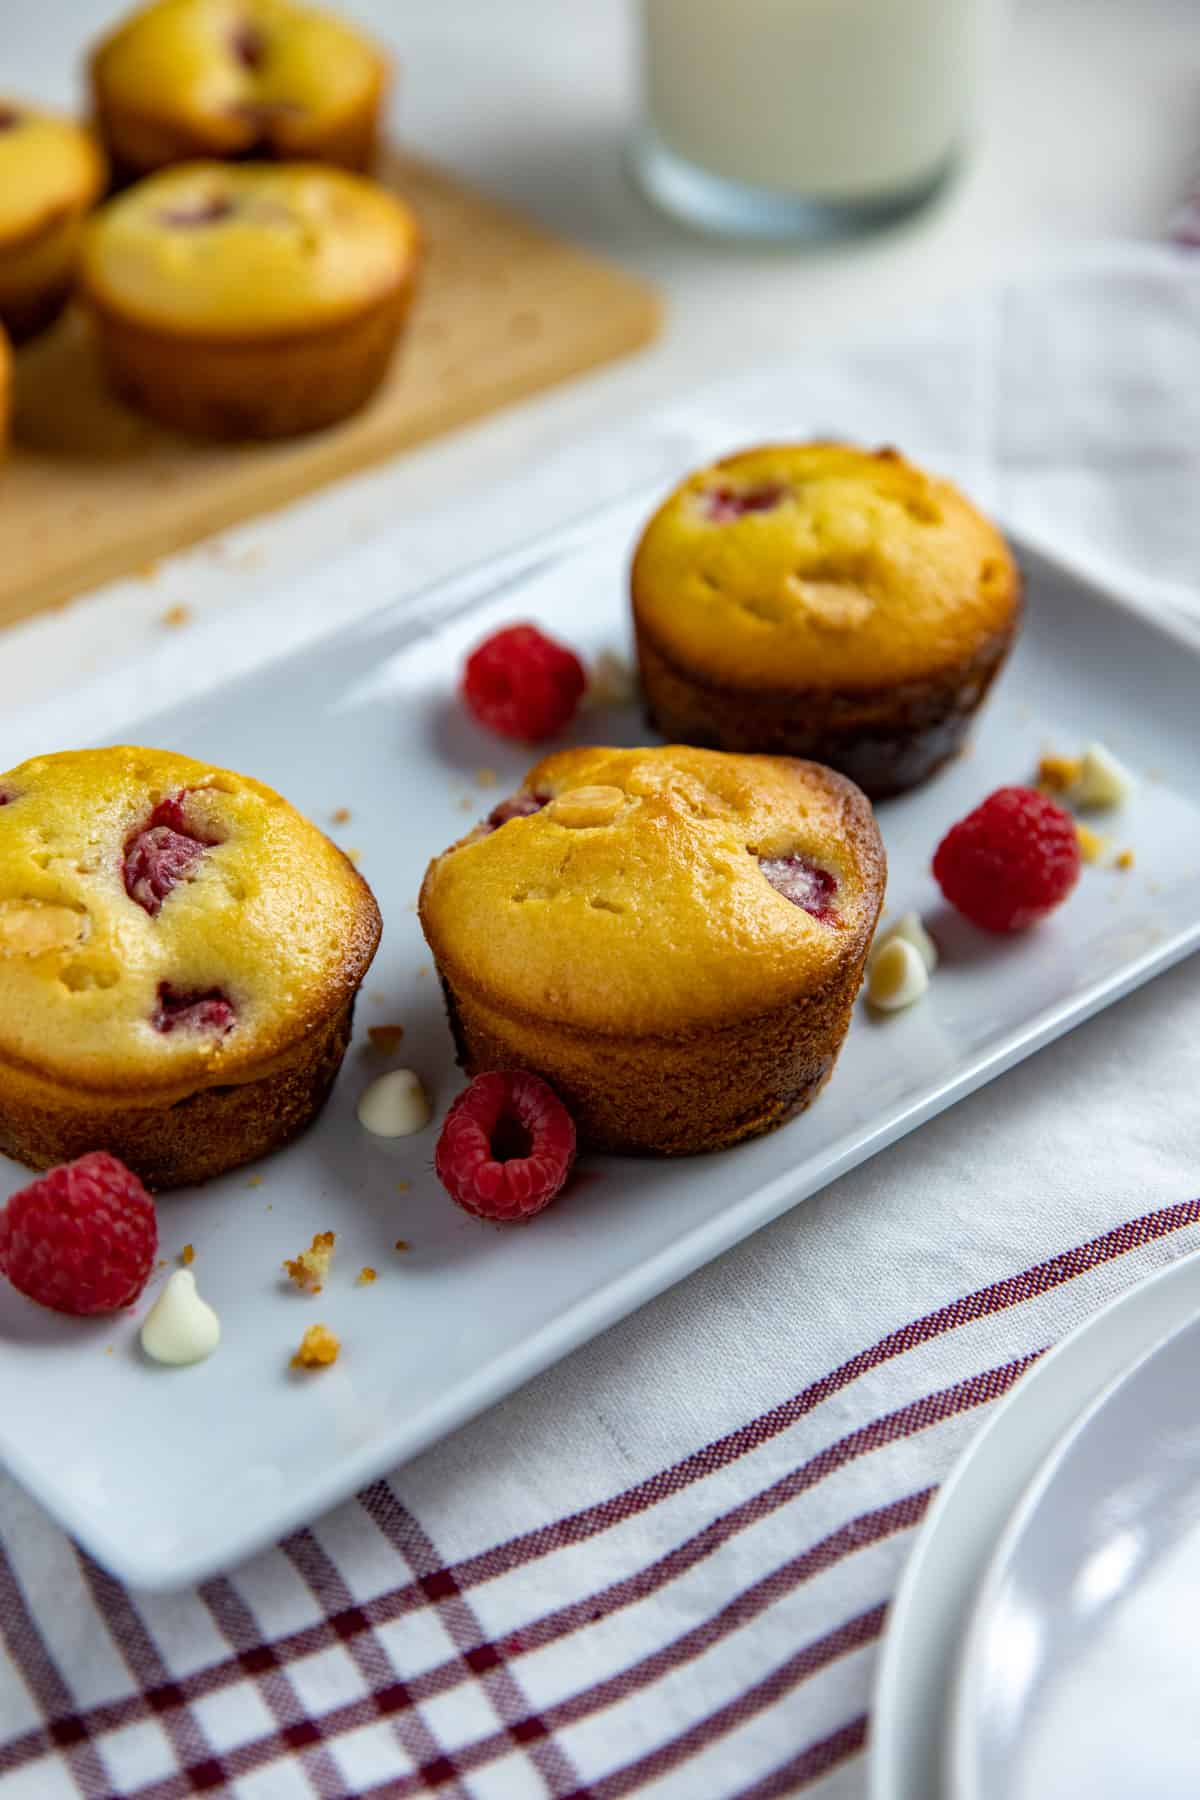 three baked muffins on white rectangular dish with raspberries and white chocolate chips scattered around the muffins